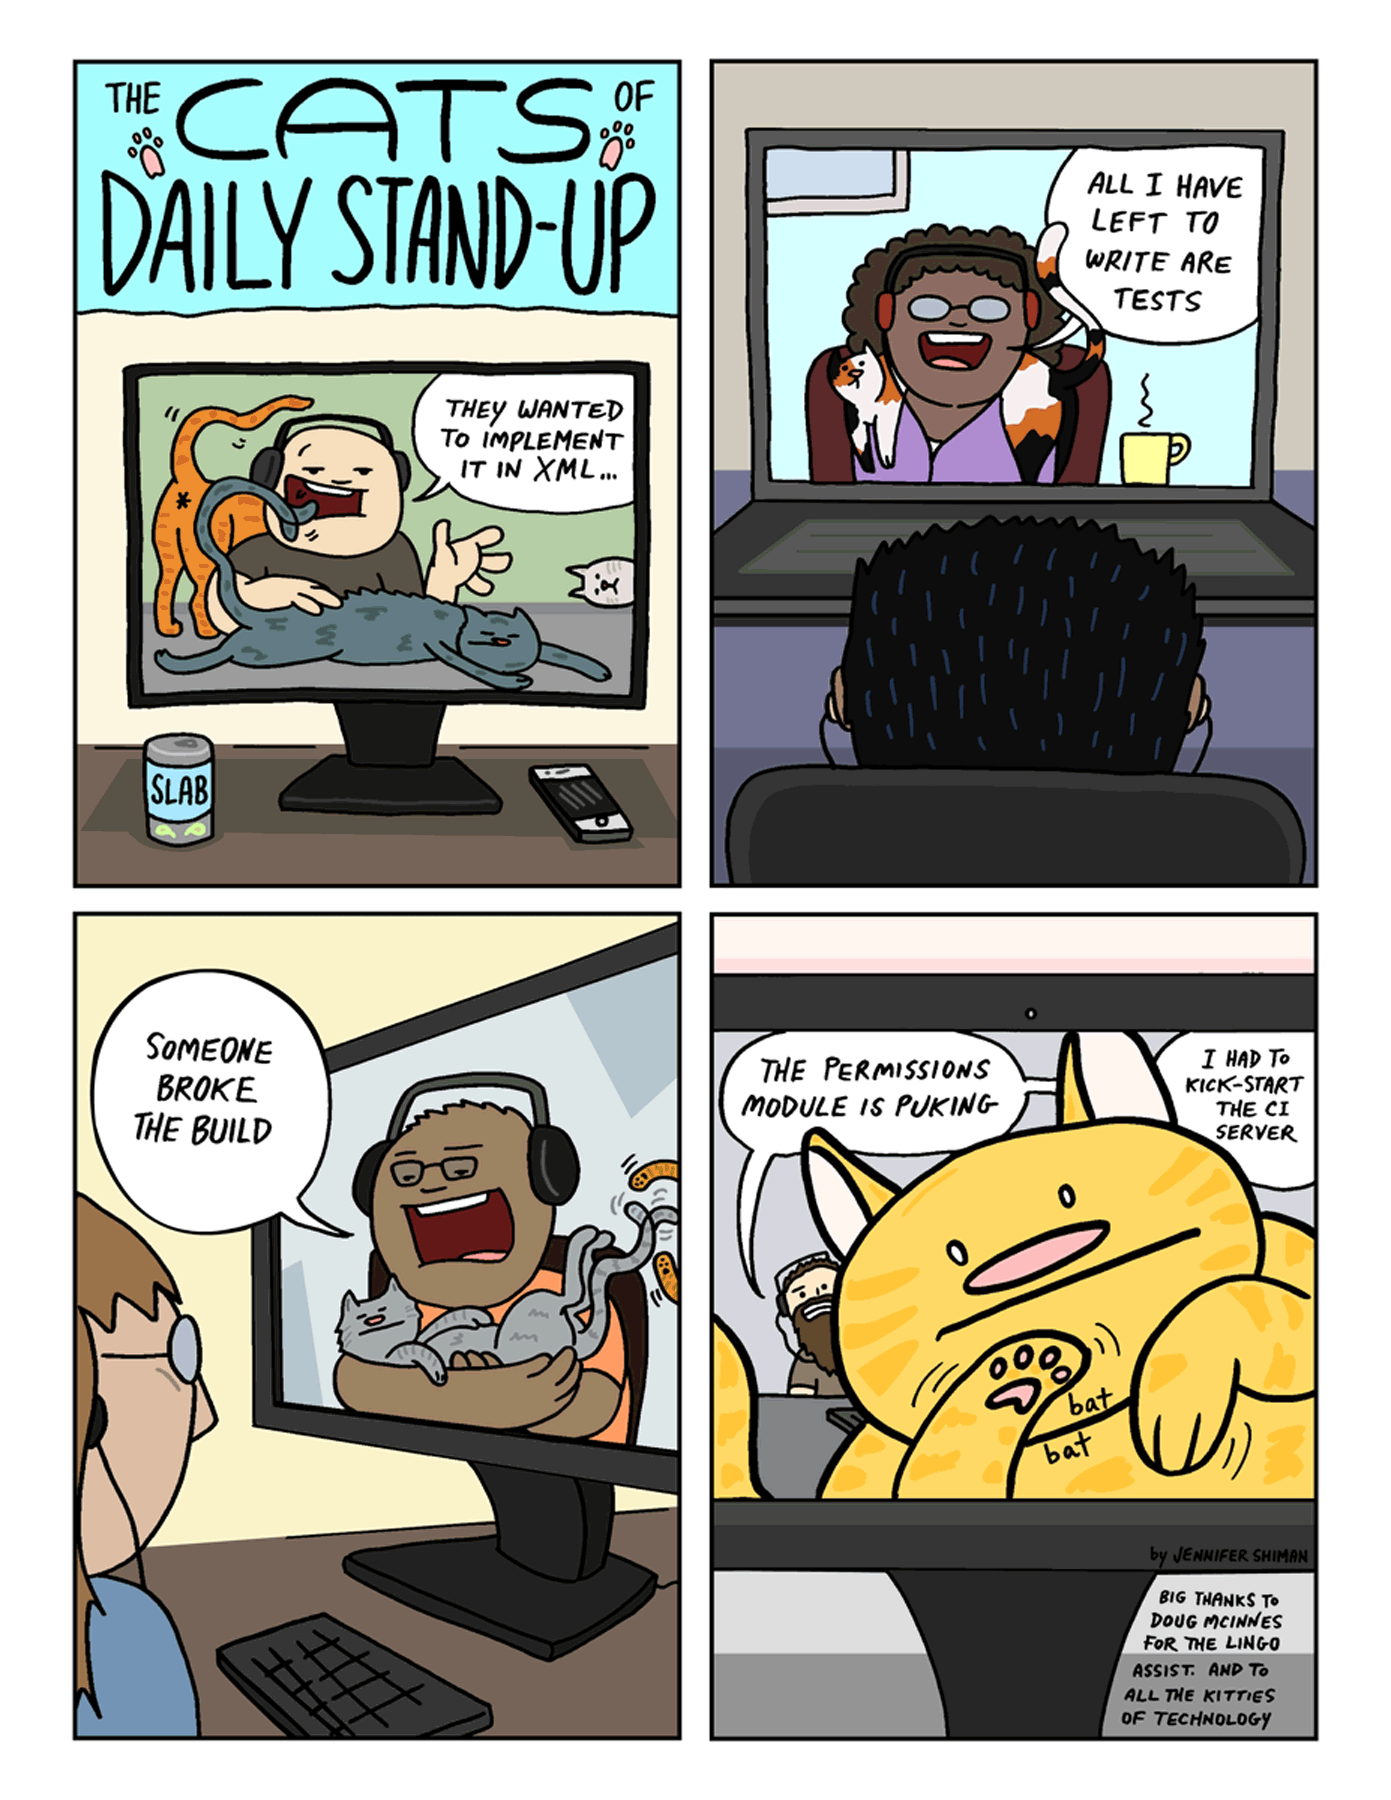 The cats of daily stand-up